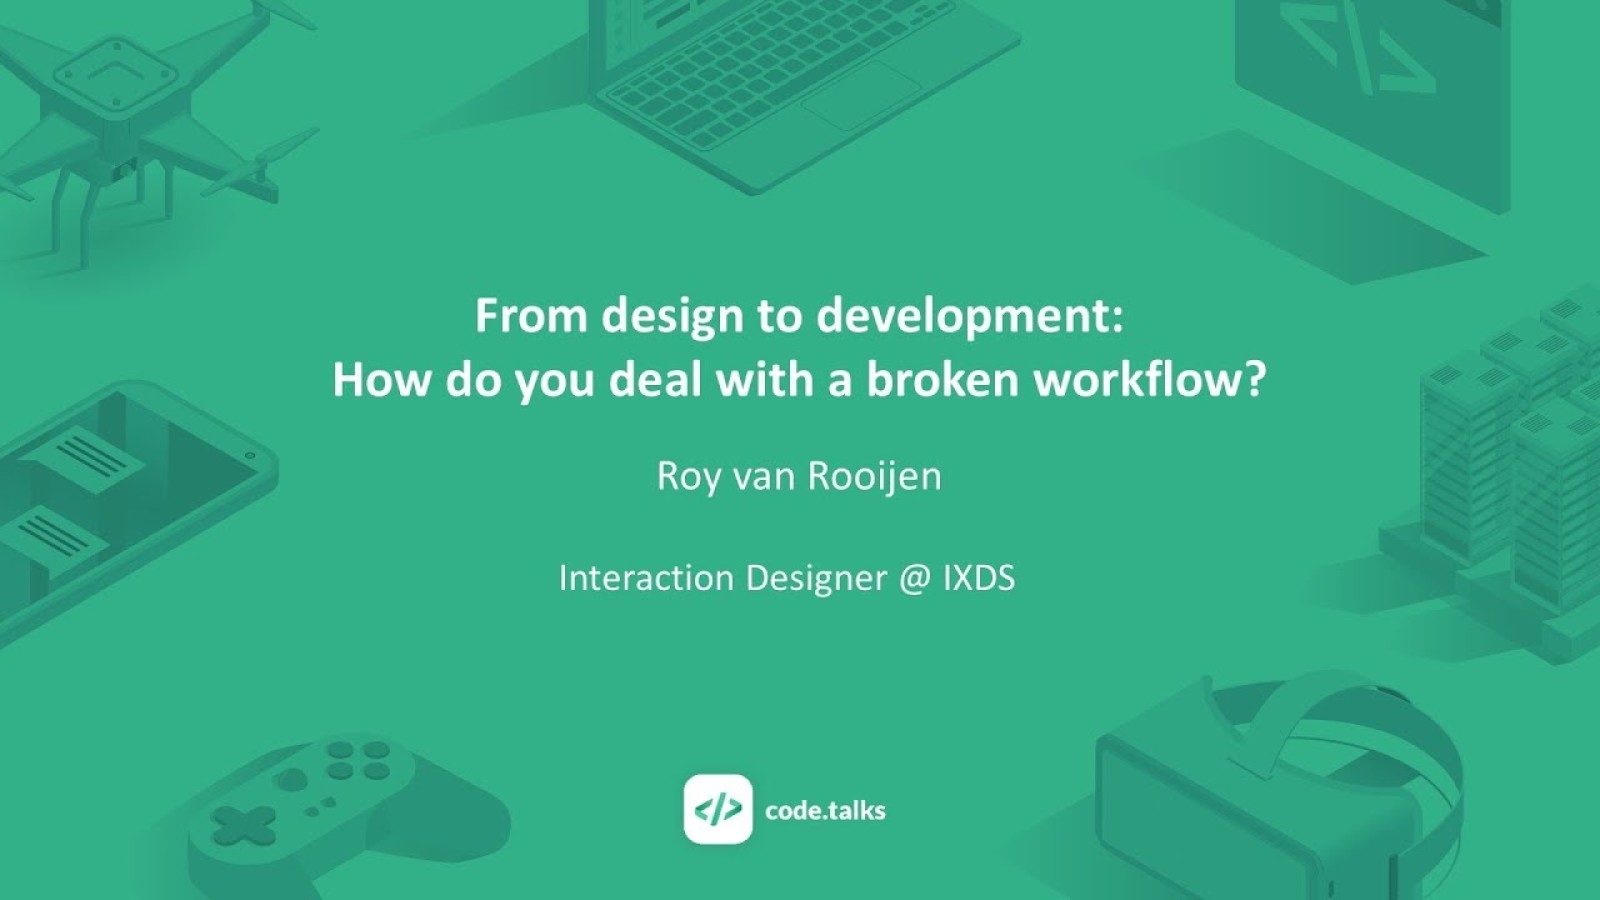 From design to development: How do you deal with a broken workflow?